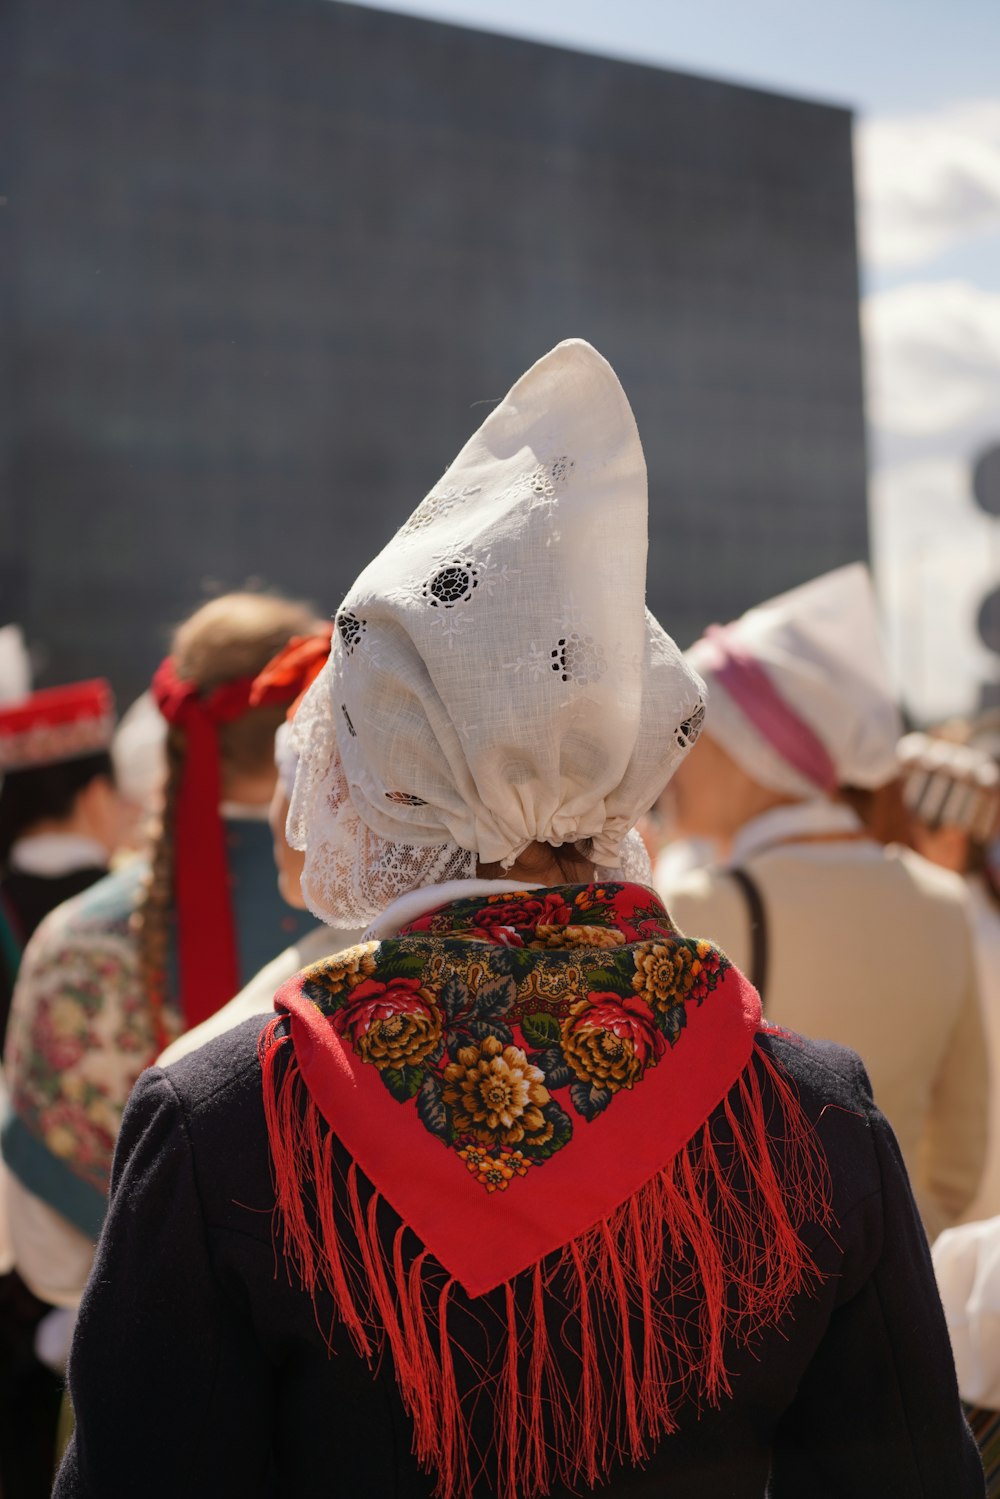 a person wearing a white hat and red dress